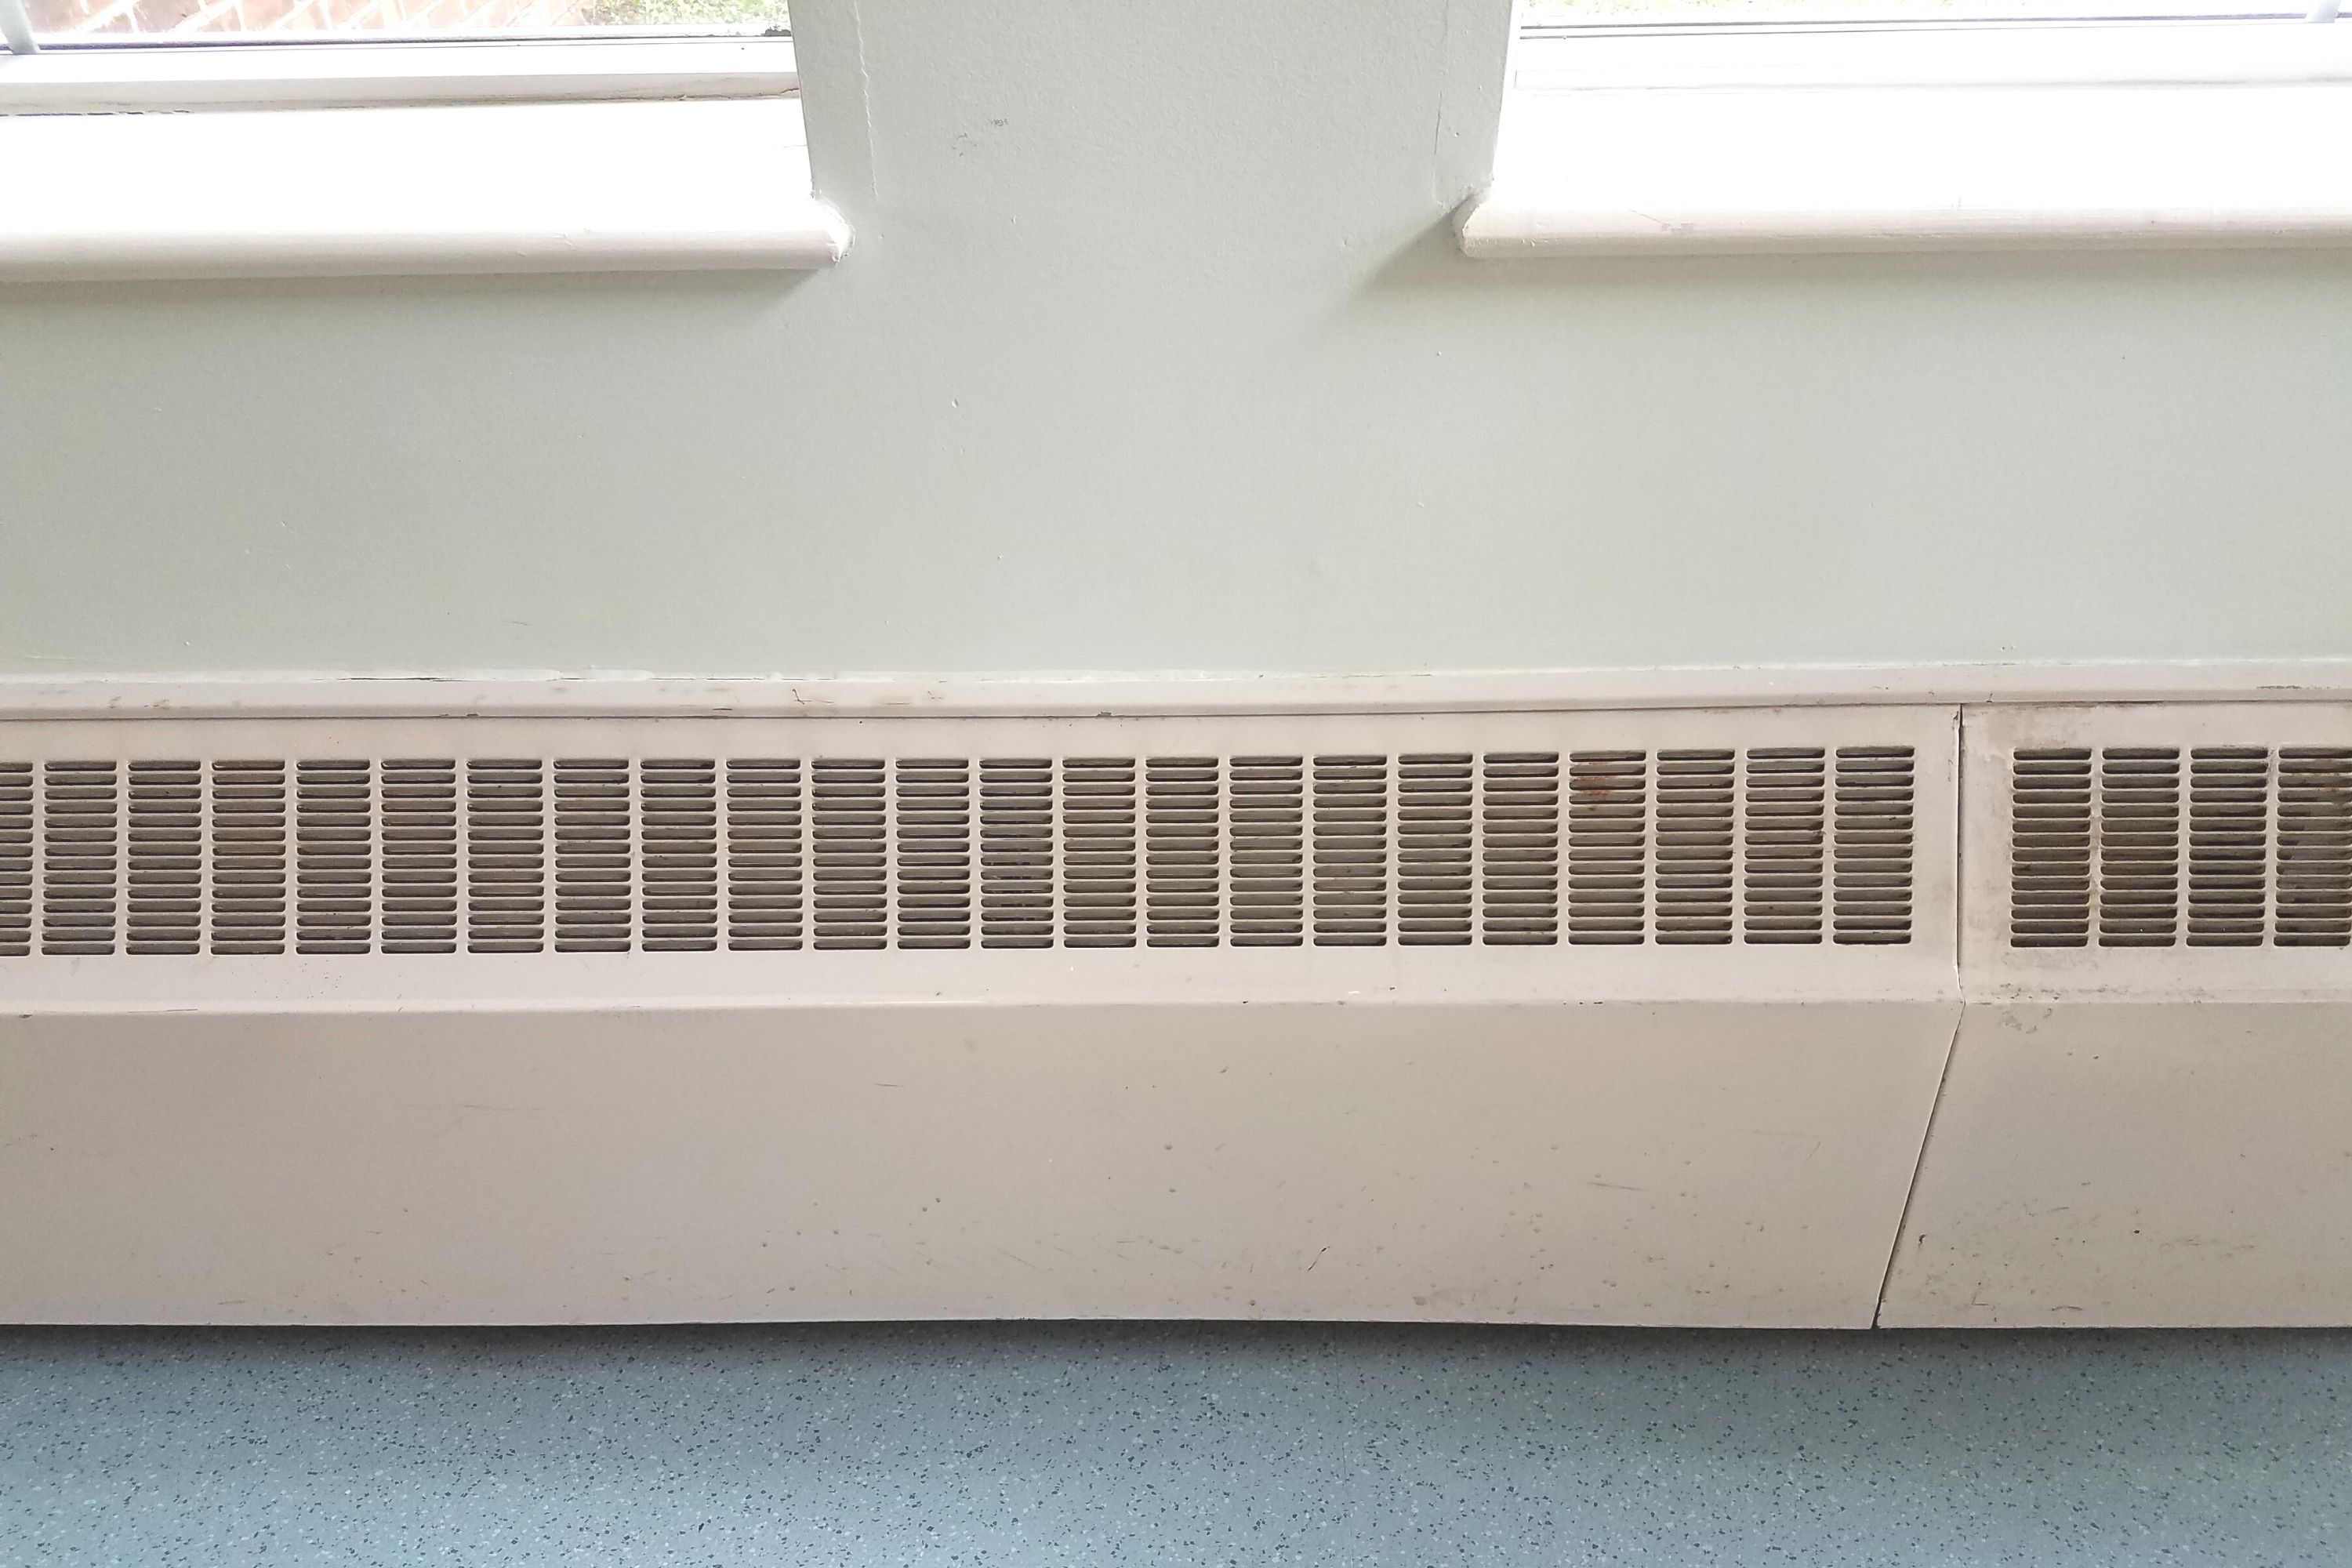 How to Turn Off a Baseboard Heater That Doesn’t Have a Knob